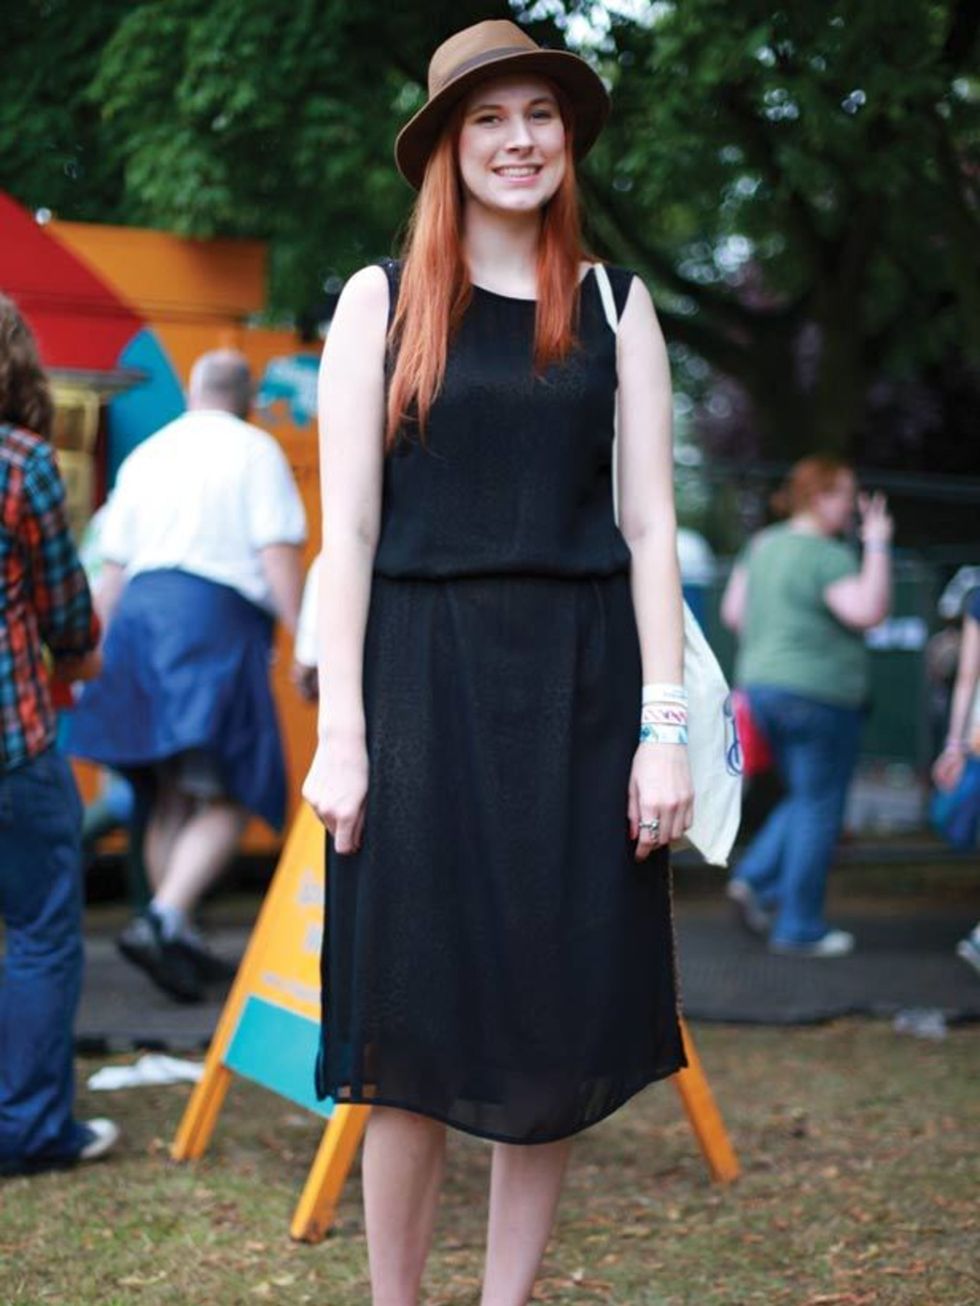 <p>Photo by Lucie Kerley.Amy Critchlow, 21, Fashion Student. Urban Outfitters dress, Russell and Bromley shoes, H&amp;M hat.</p>